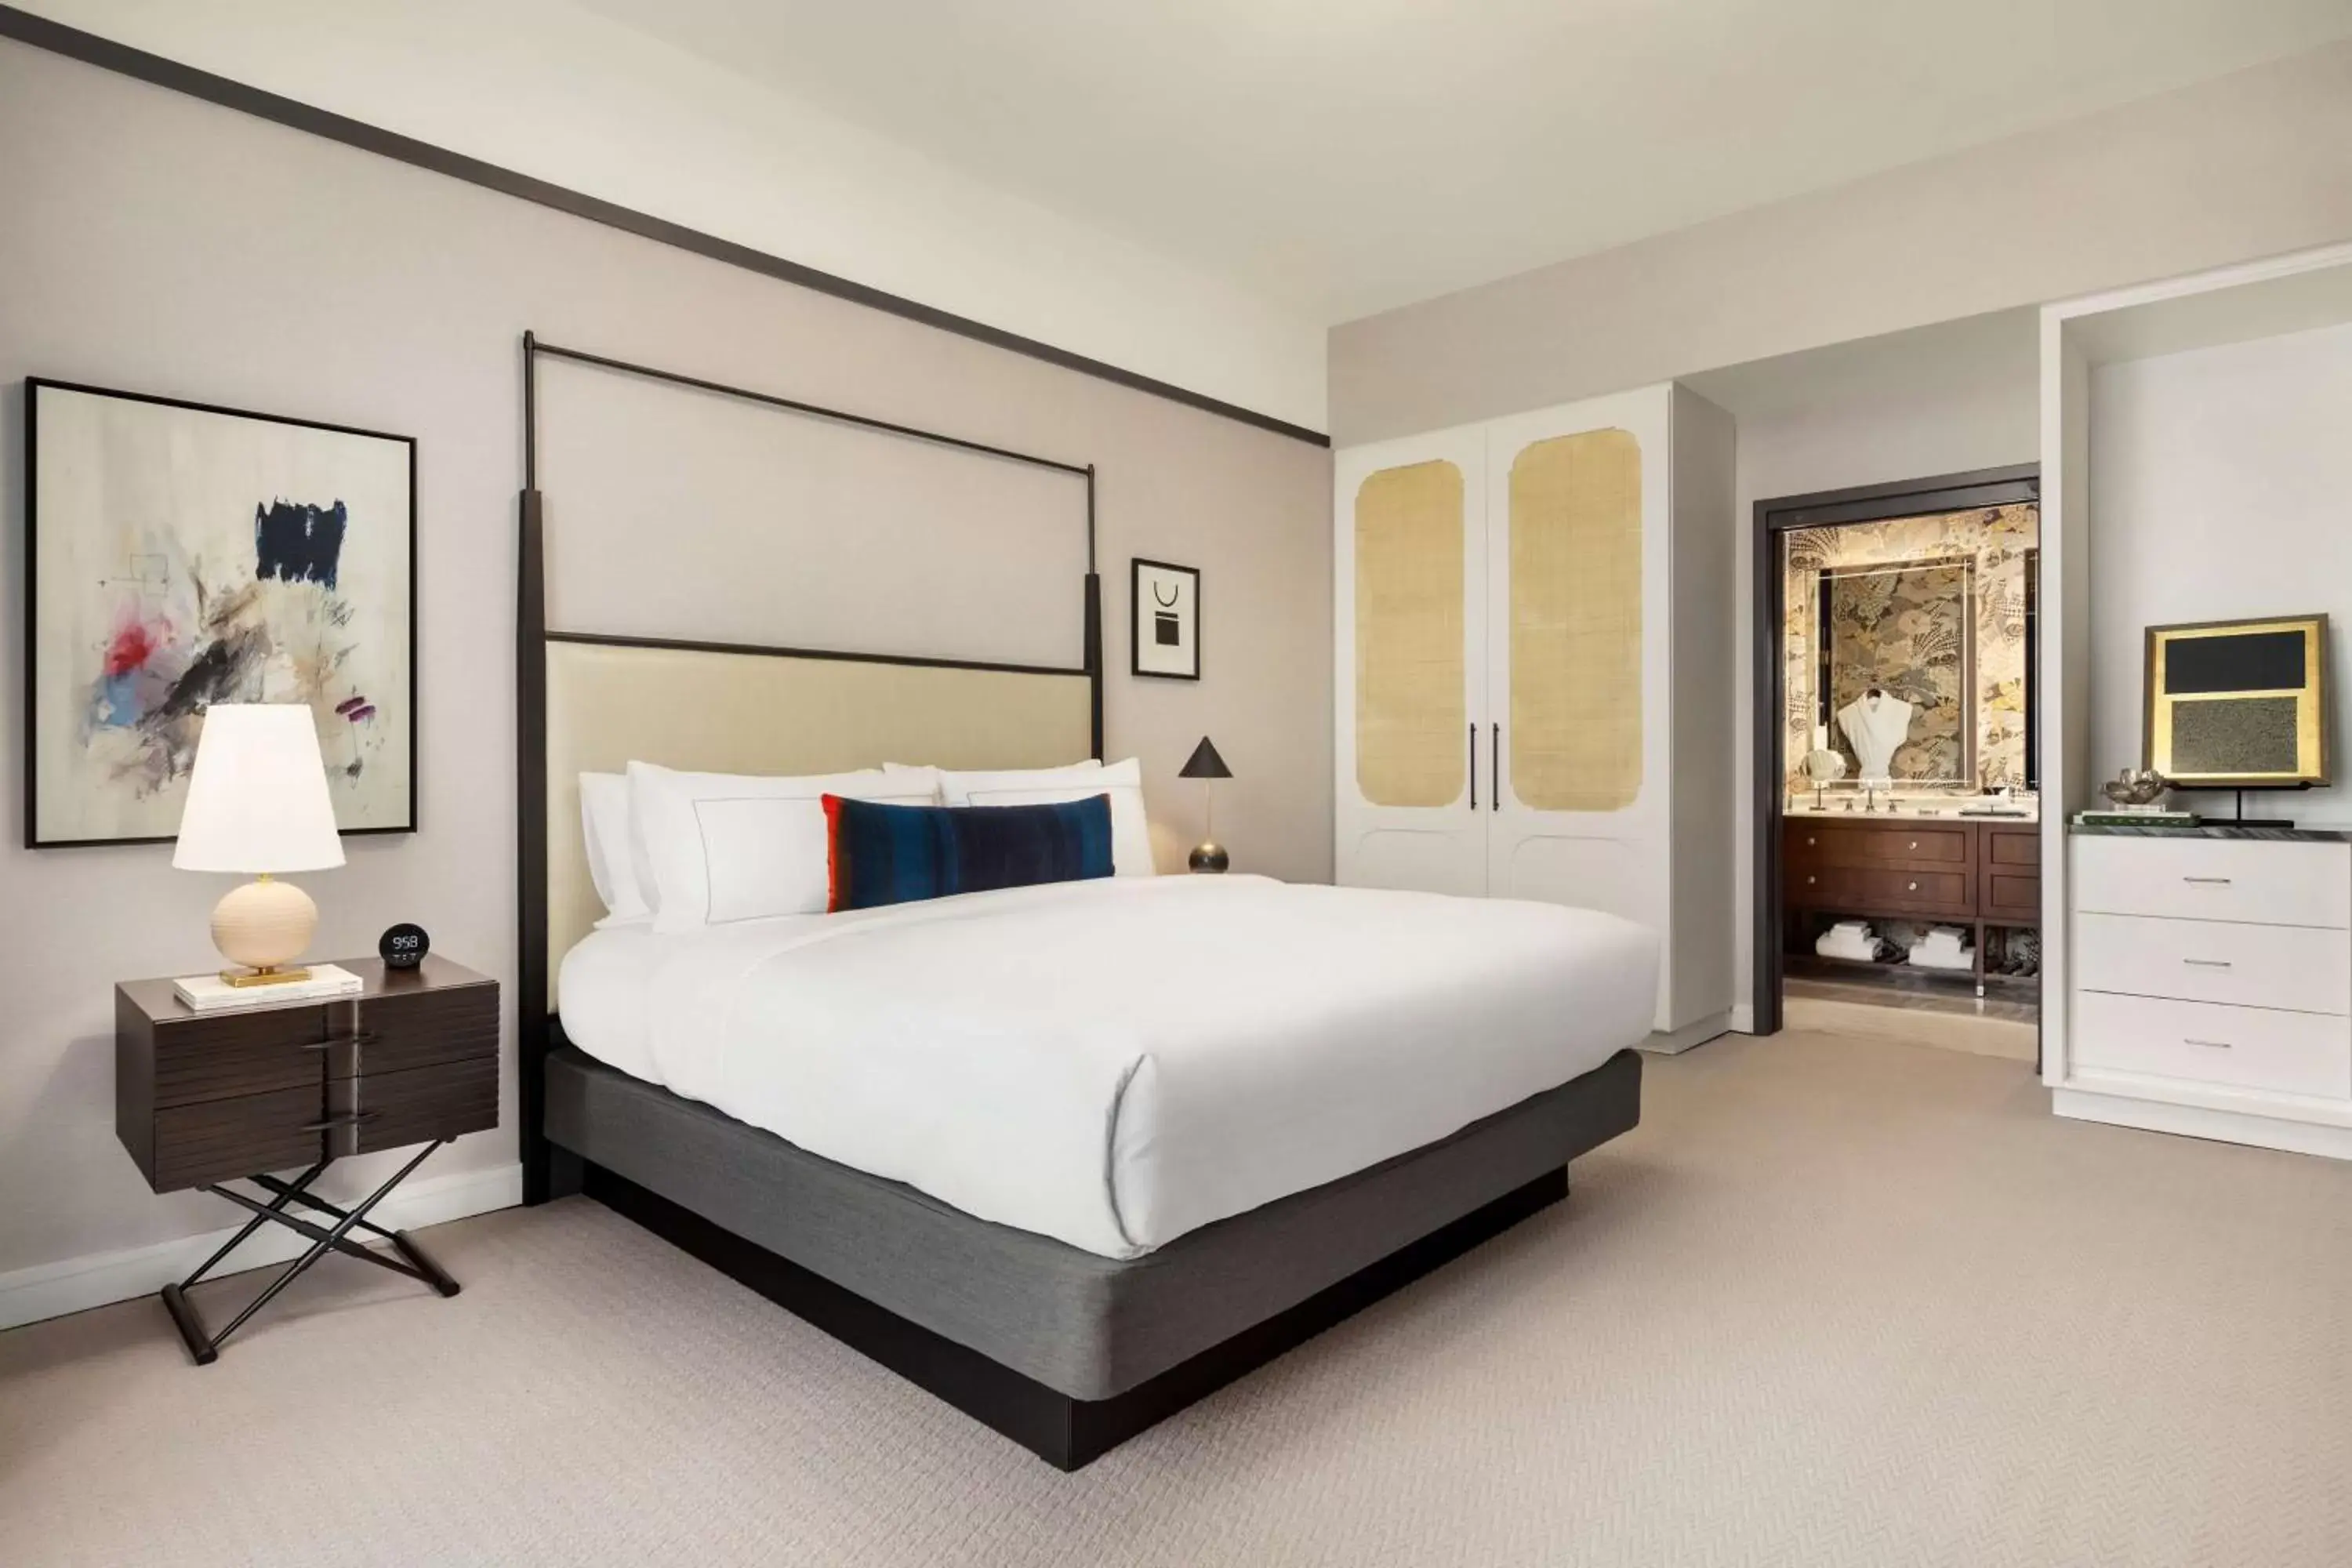 Bed in Valley Hotel Homewood Birmingham - Curio Collection By Hilton